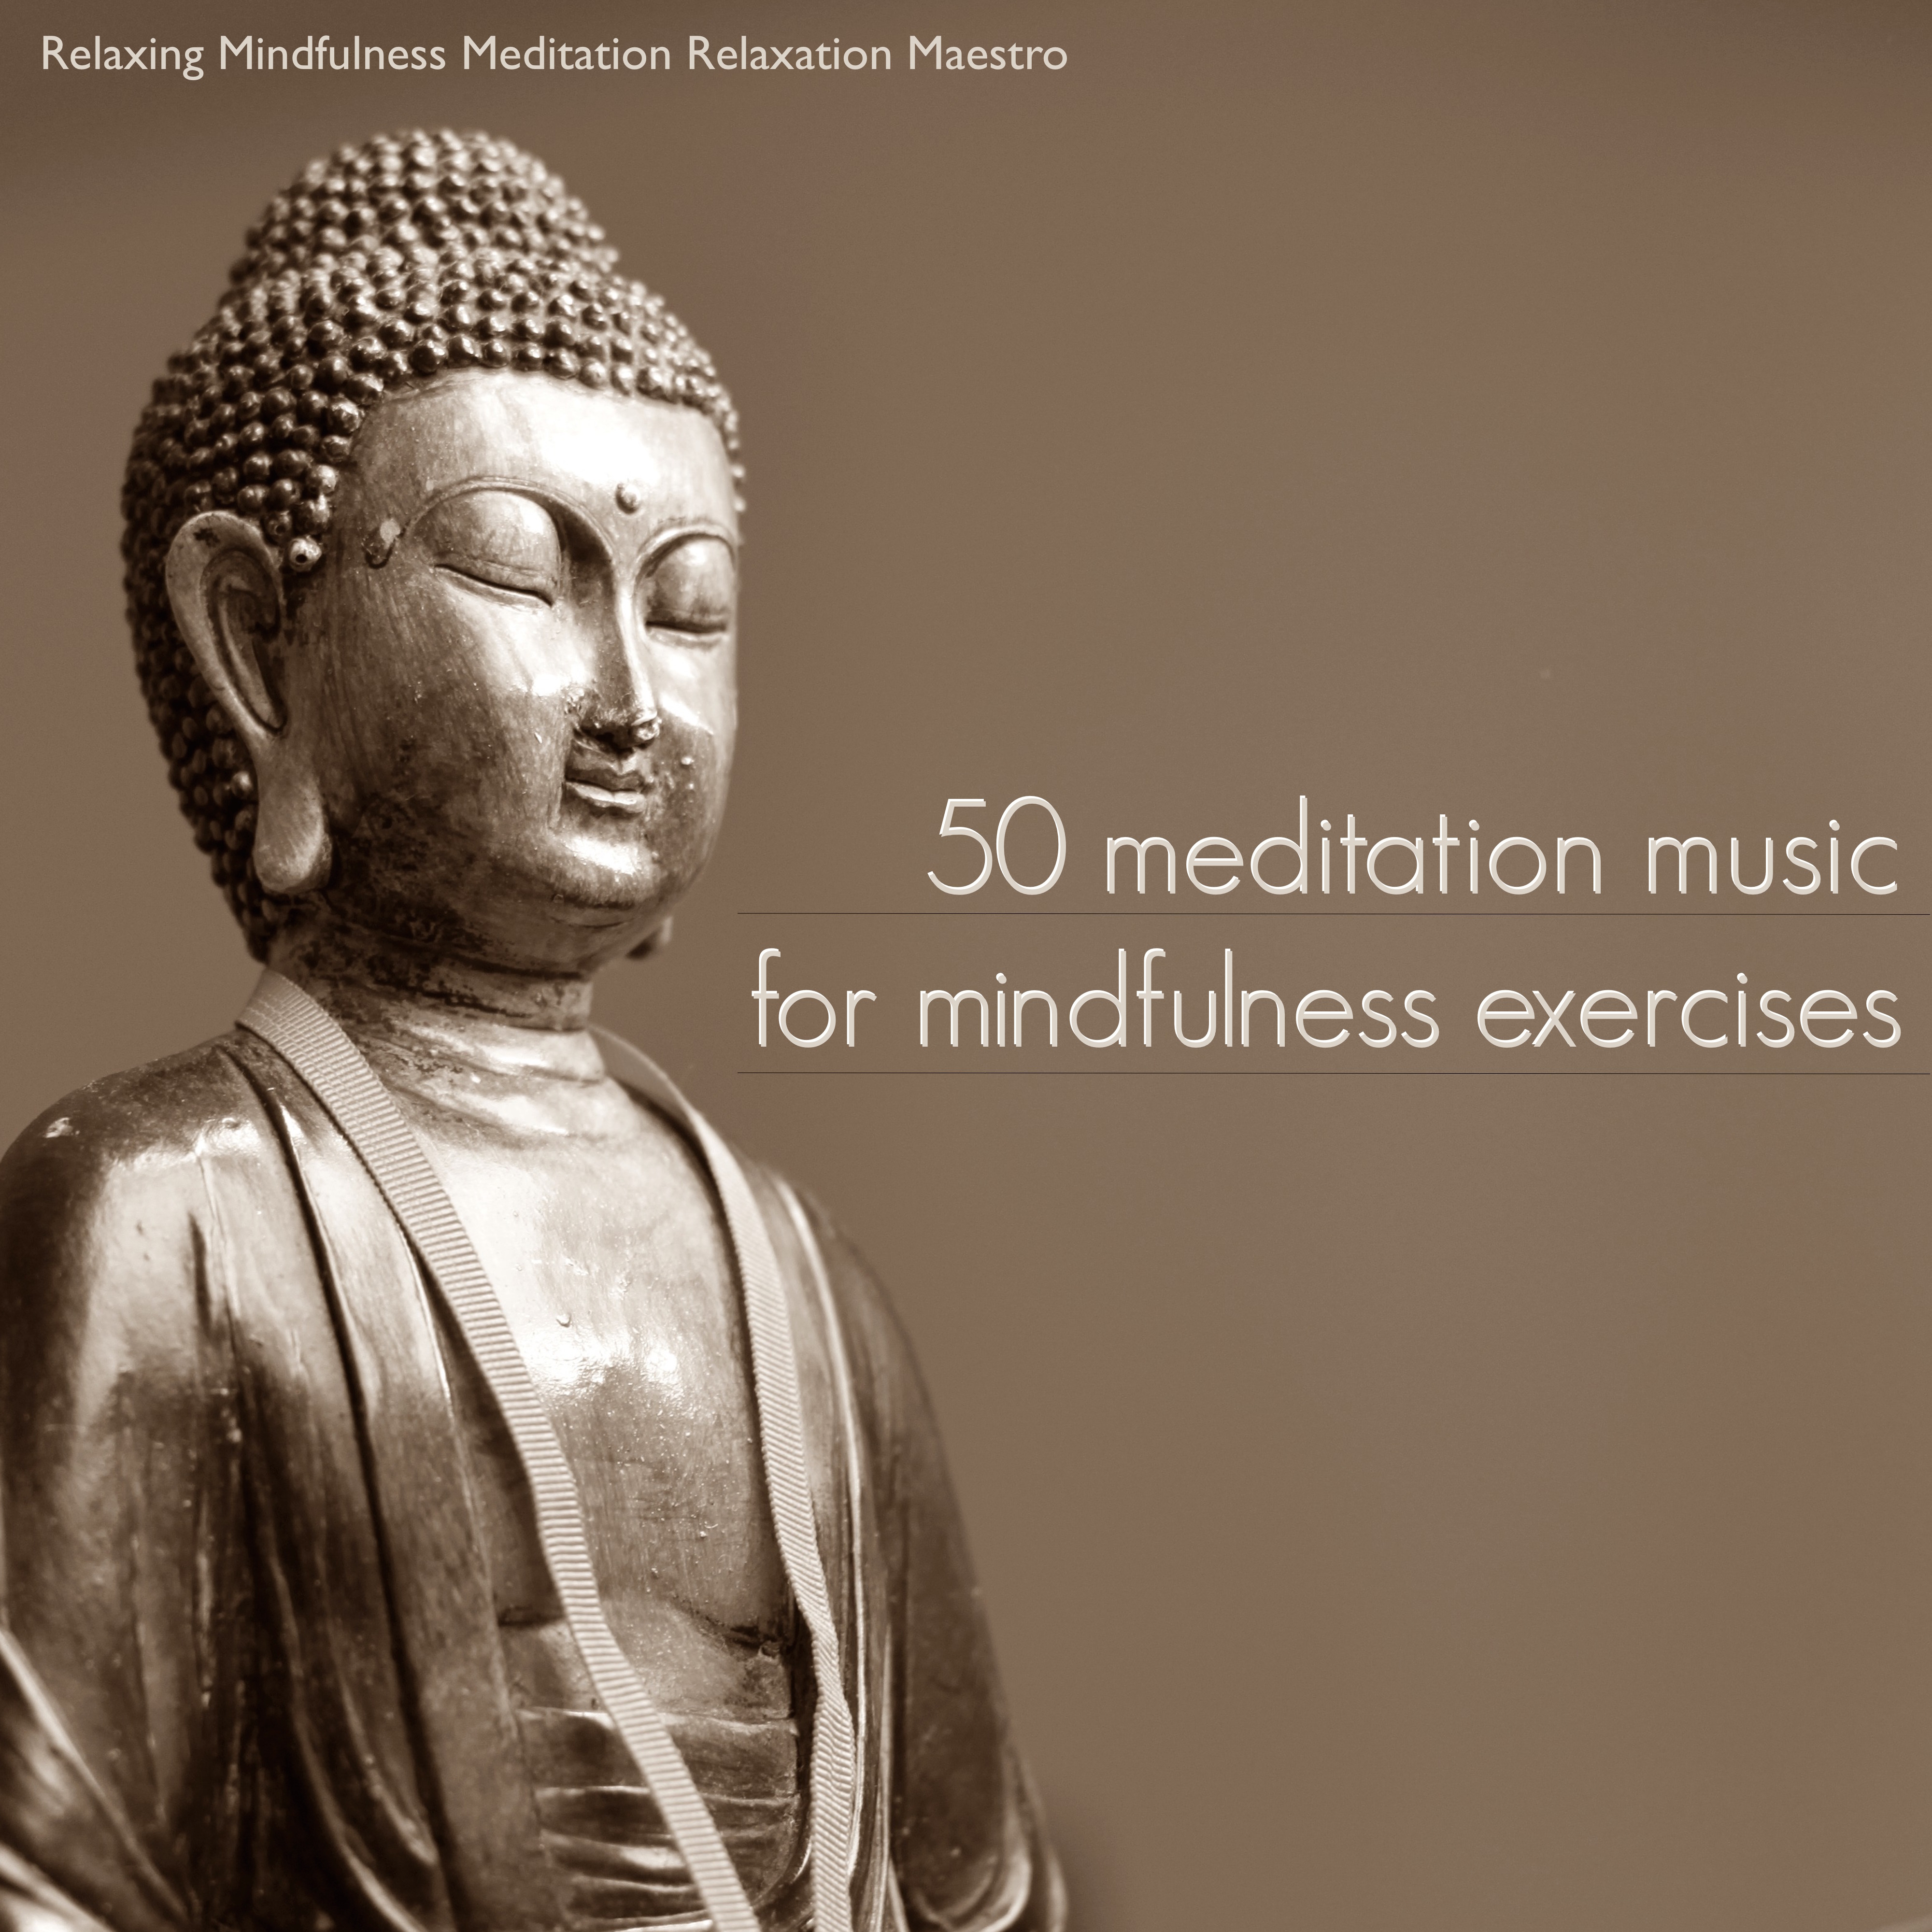 50 Meditation Music for Mindfulness Exercises - Meditation Songs & Relaxing Music for Yoga Meditation and Guided Imagery